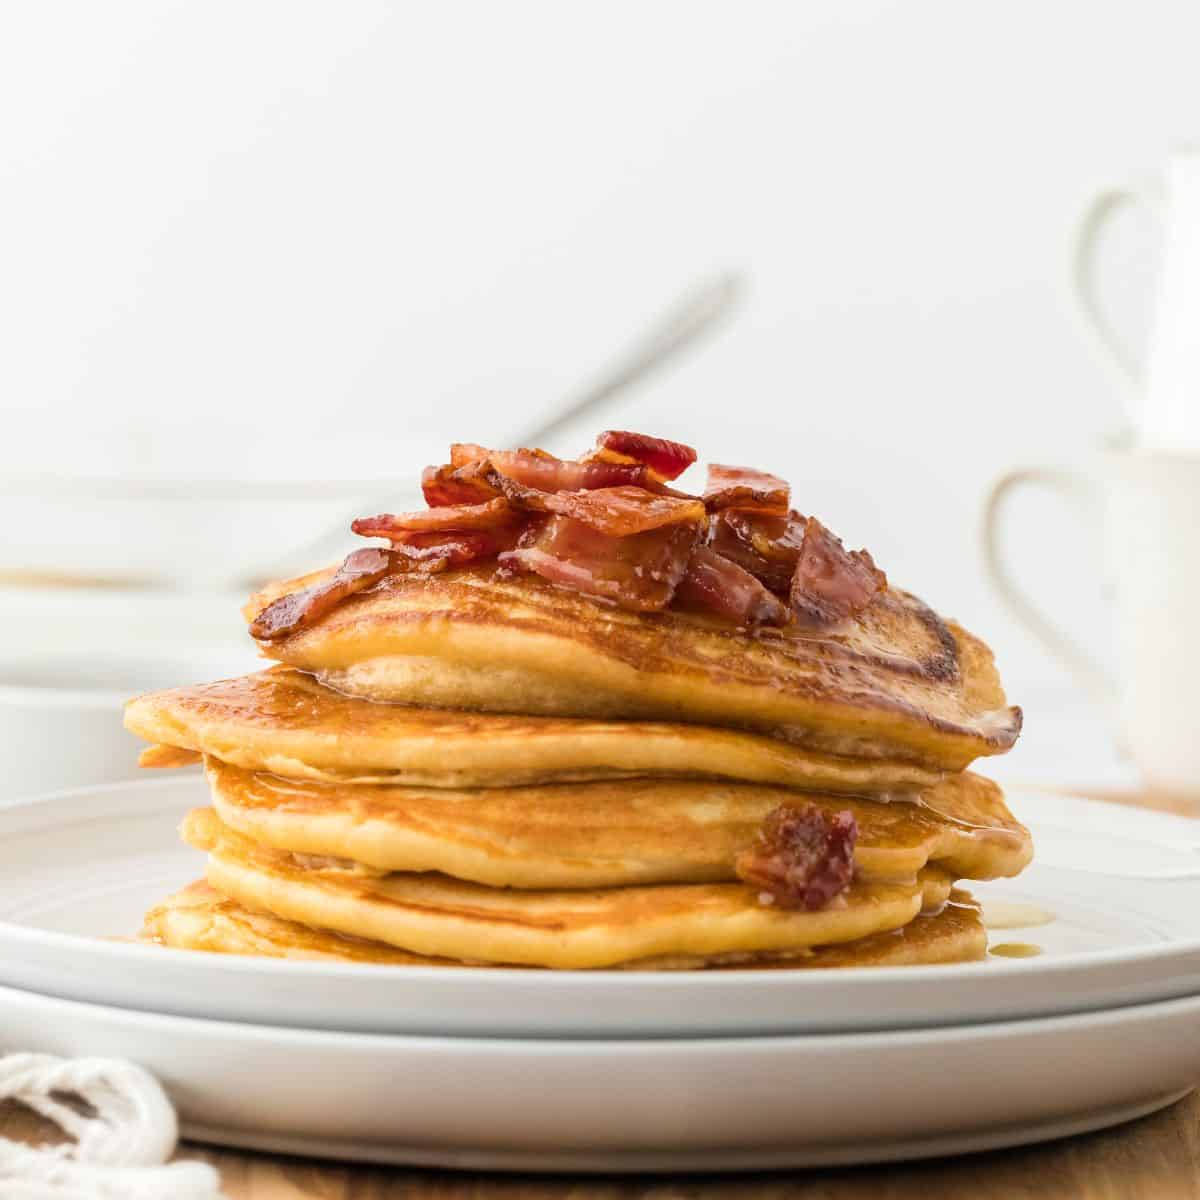 Brown Sugar Pancakes with Bacon Butter topped with bacon bits and sitting on a white and blue plate with a fork